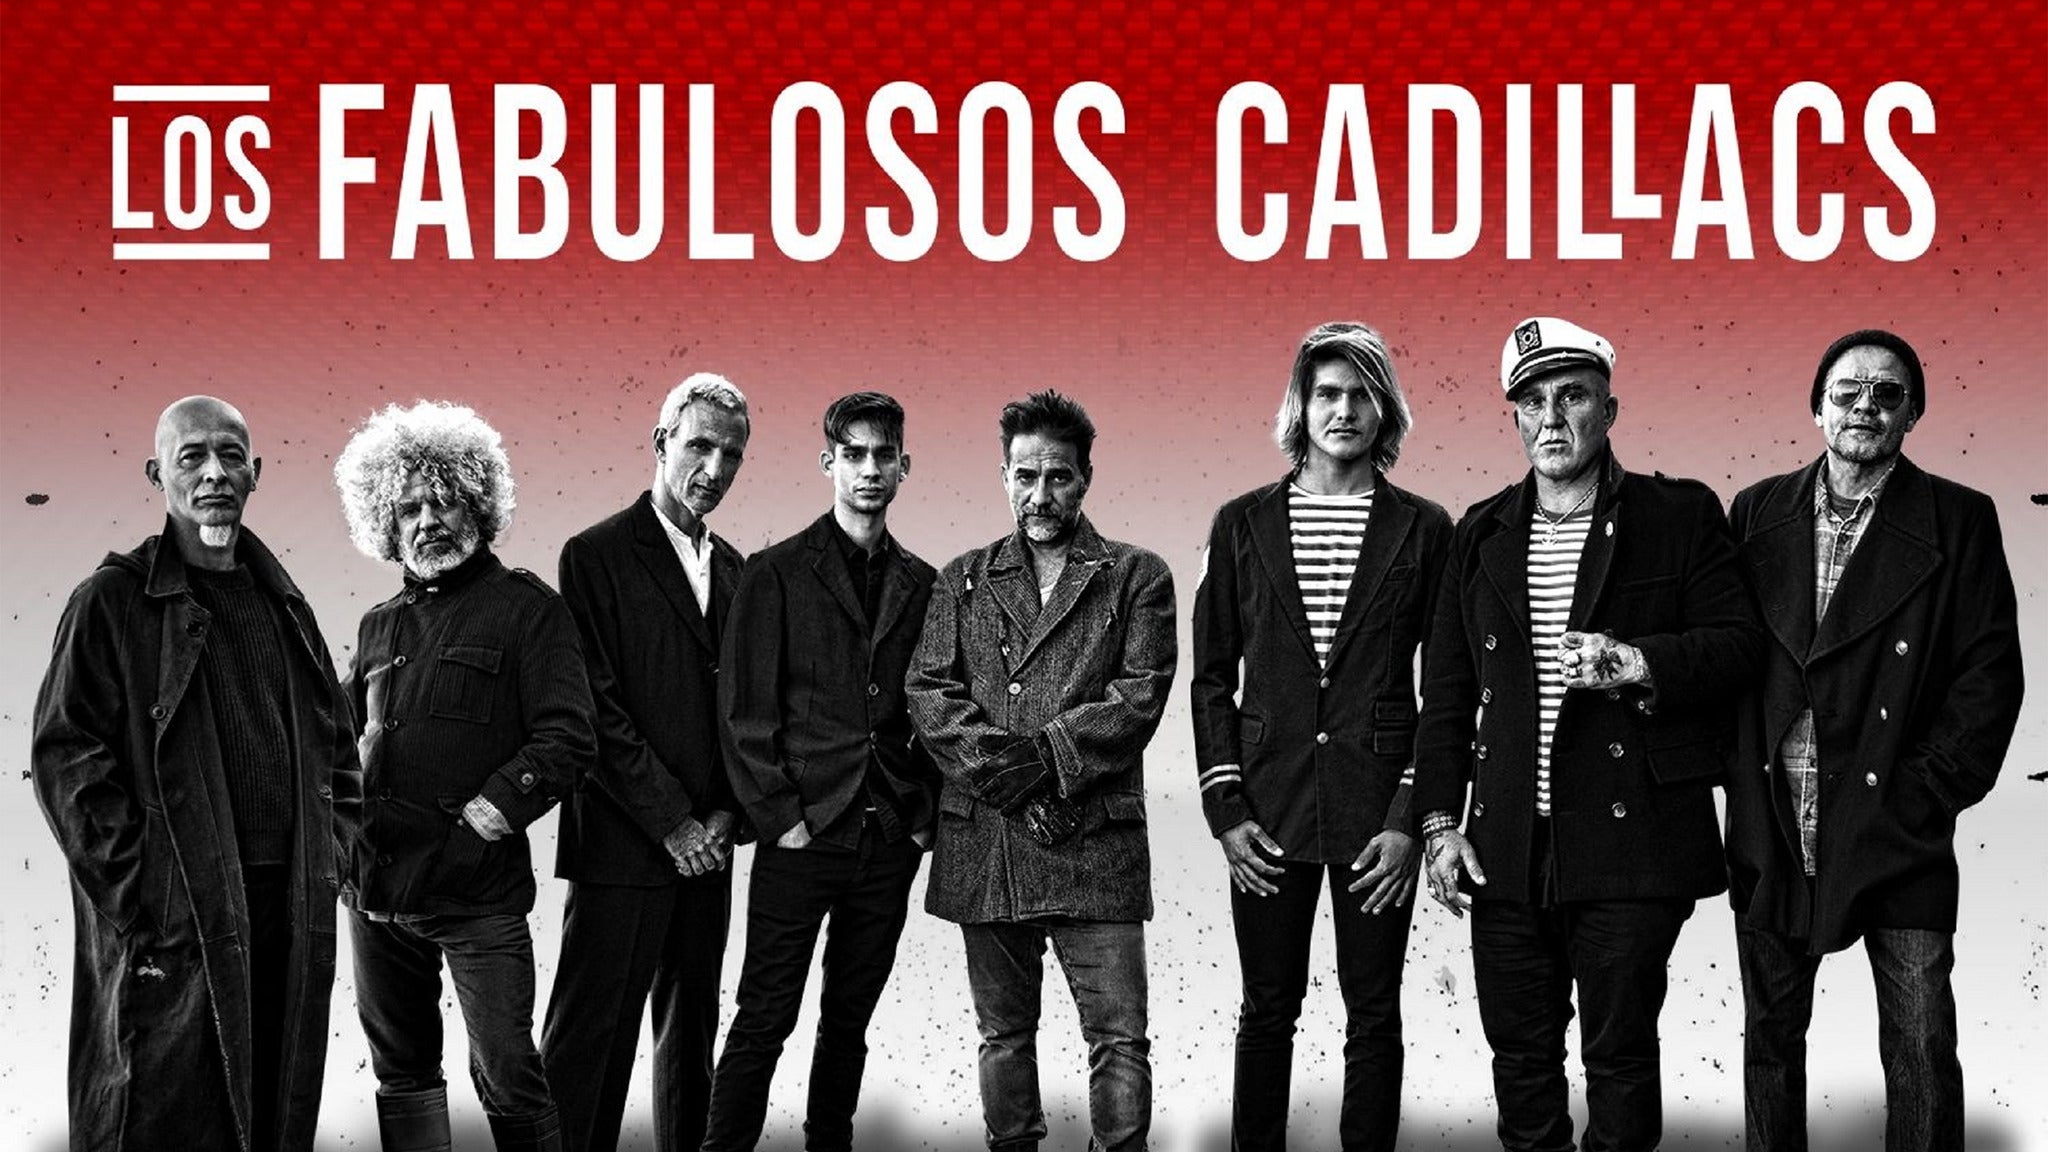 Los Fabulosos Cadillacs presale password for advance tickets in Hollywood